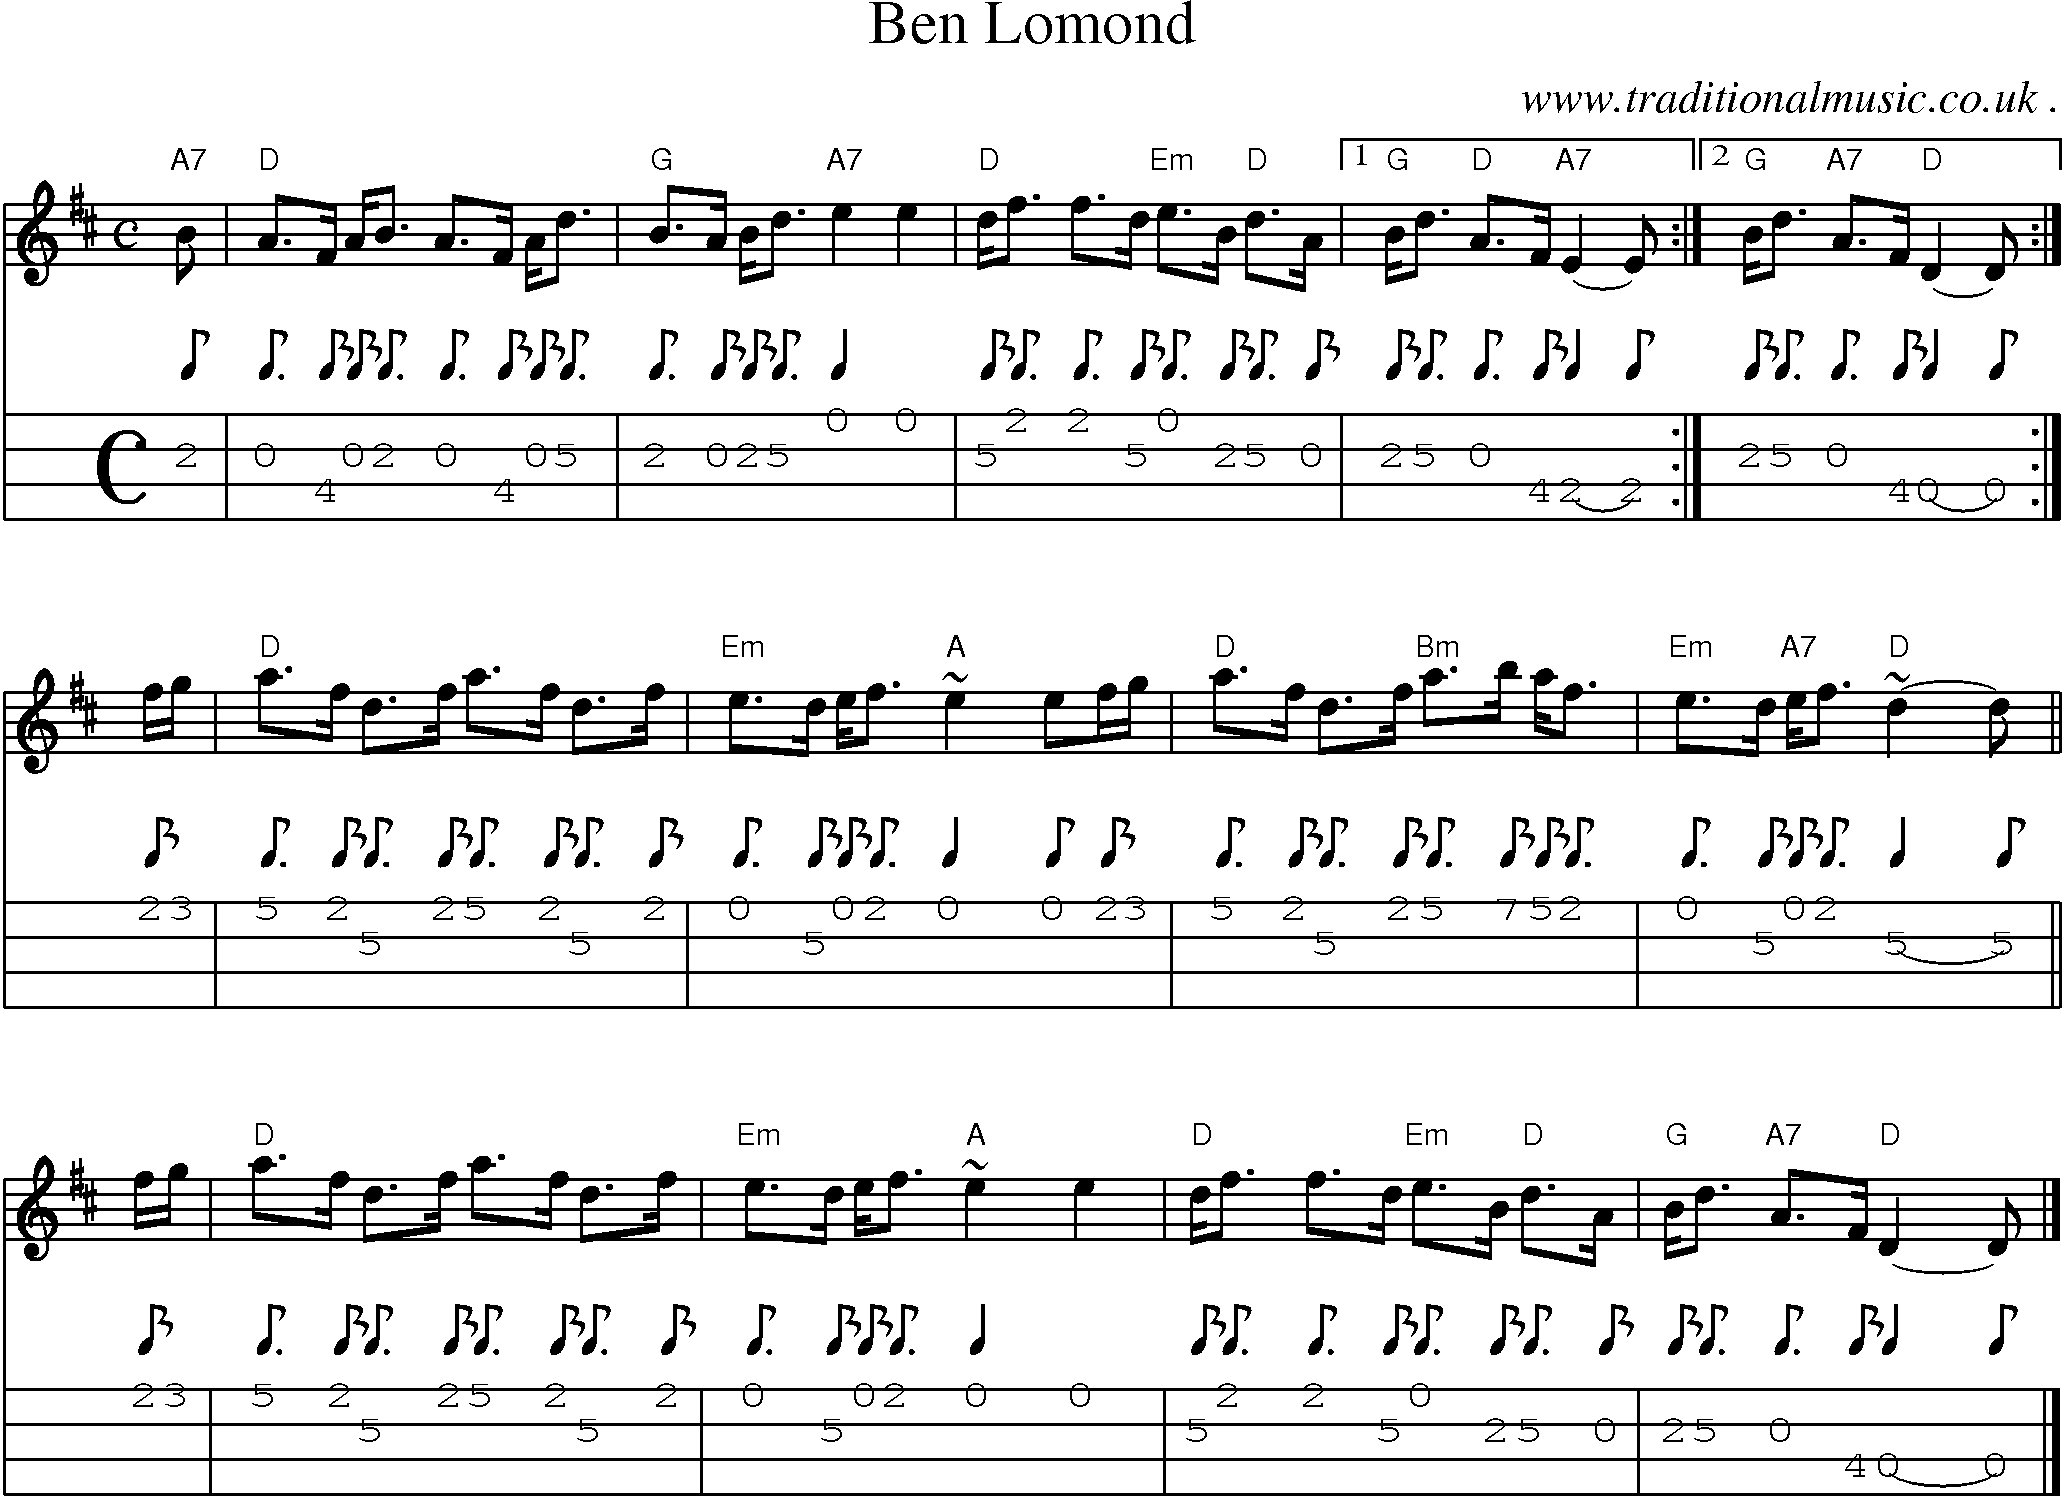 Sheet-music  score, Chords and Mandolin Tabs for Ben Lomond